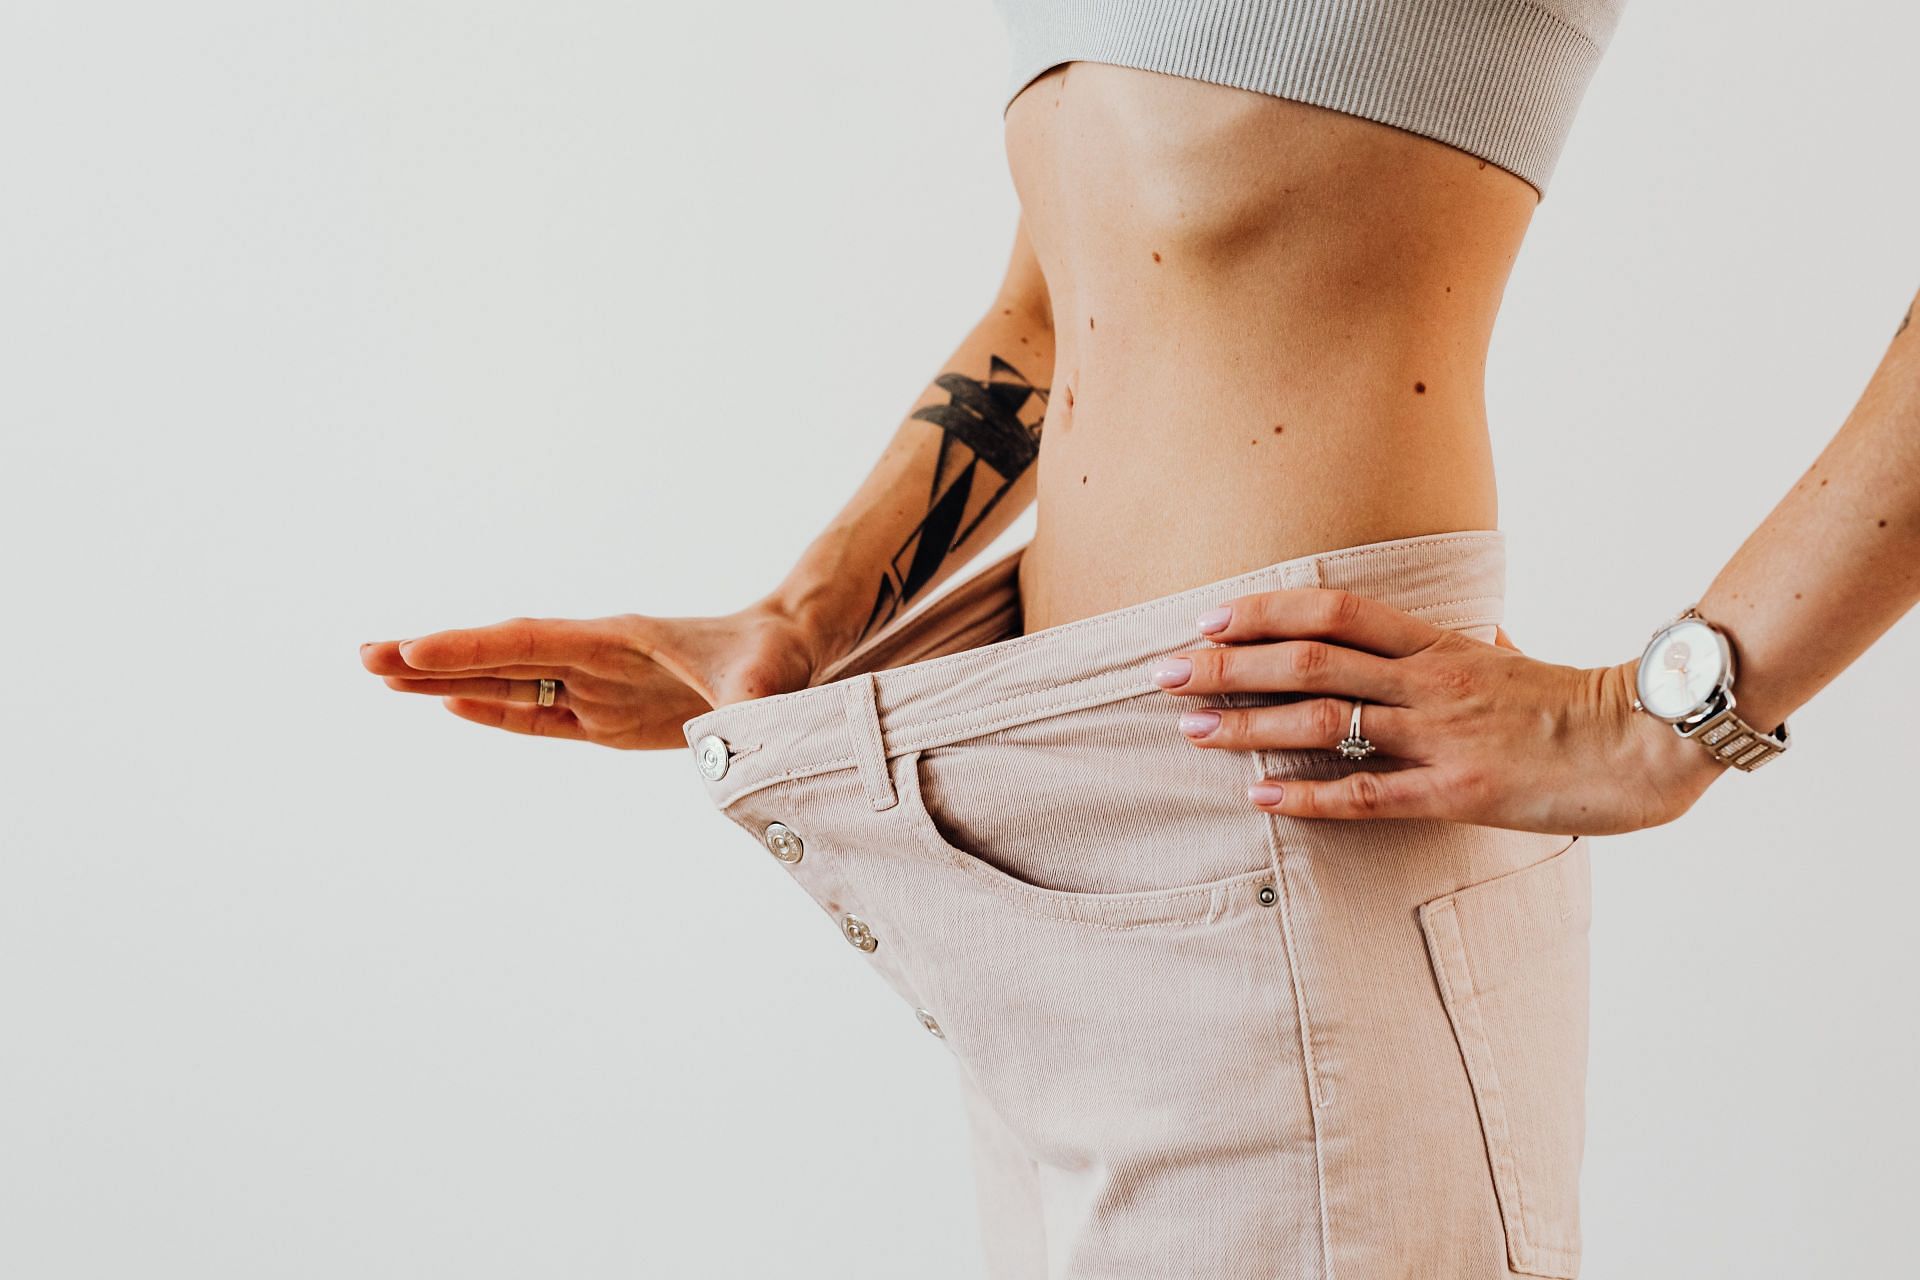 For weight loss, you must know what exercises to avoid. (Image via Pexels/ Karolina Grabowska)